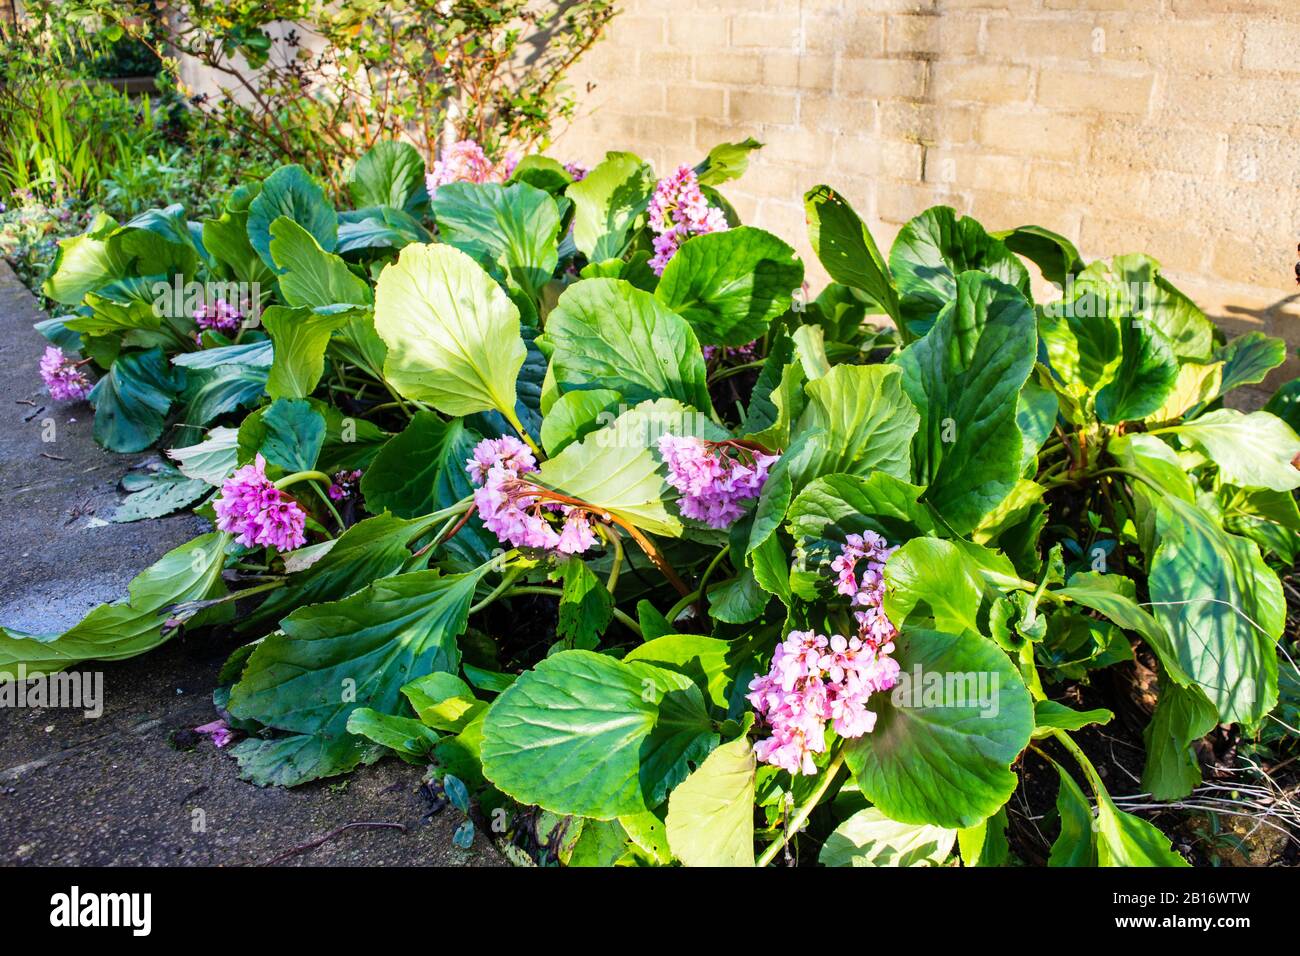 A border bed of Bergenia crassifolia, aka heart-leaved bergenia, or elephants ears, with pink flowers against a sandy coloured wall Stock Photo